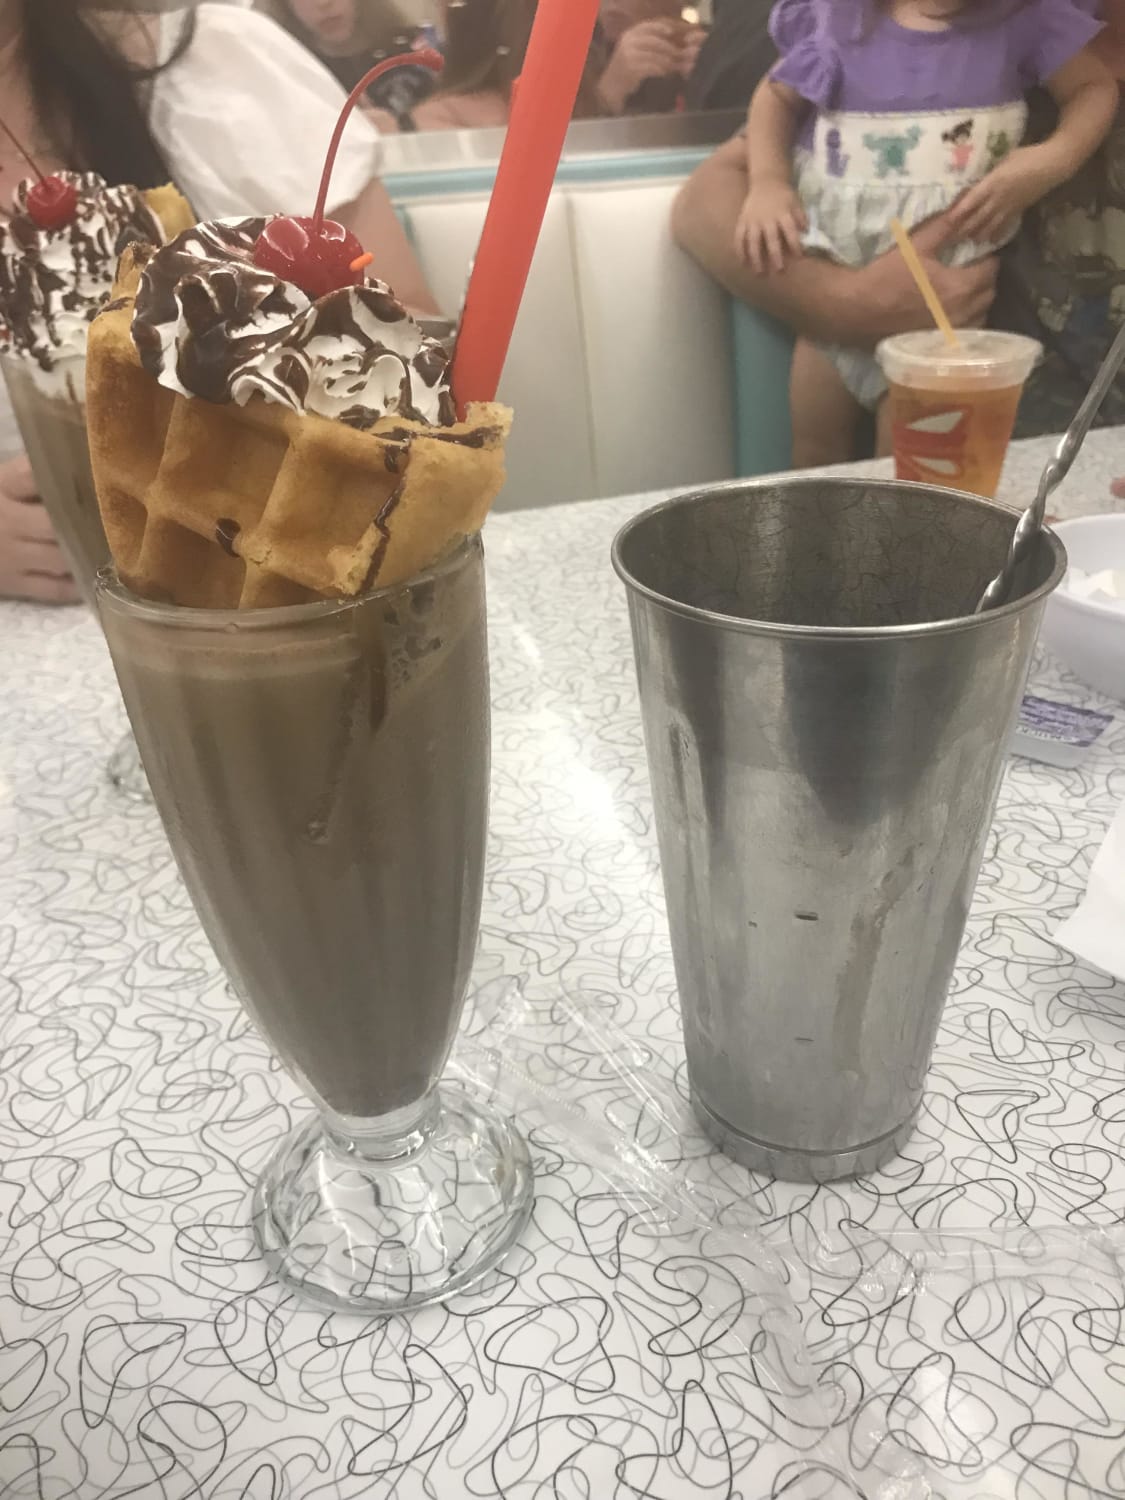 A Chocolate Milkshake with a waffle in it